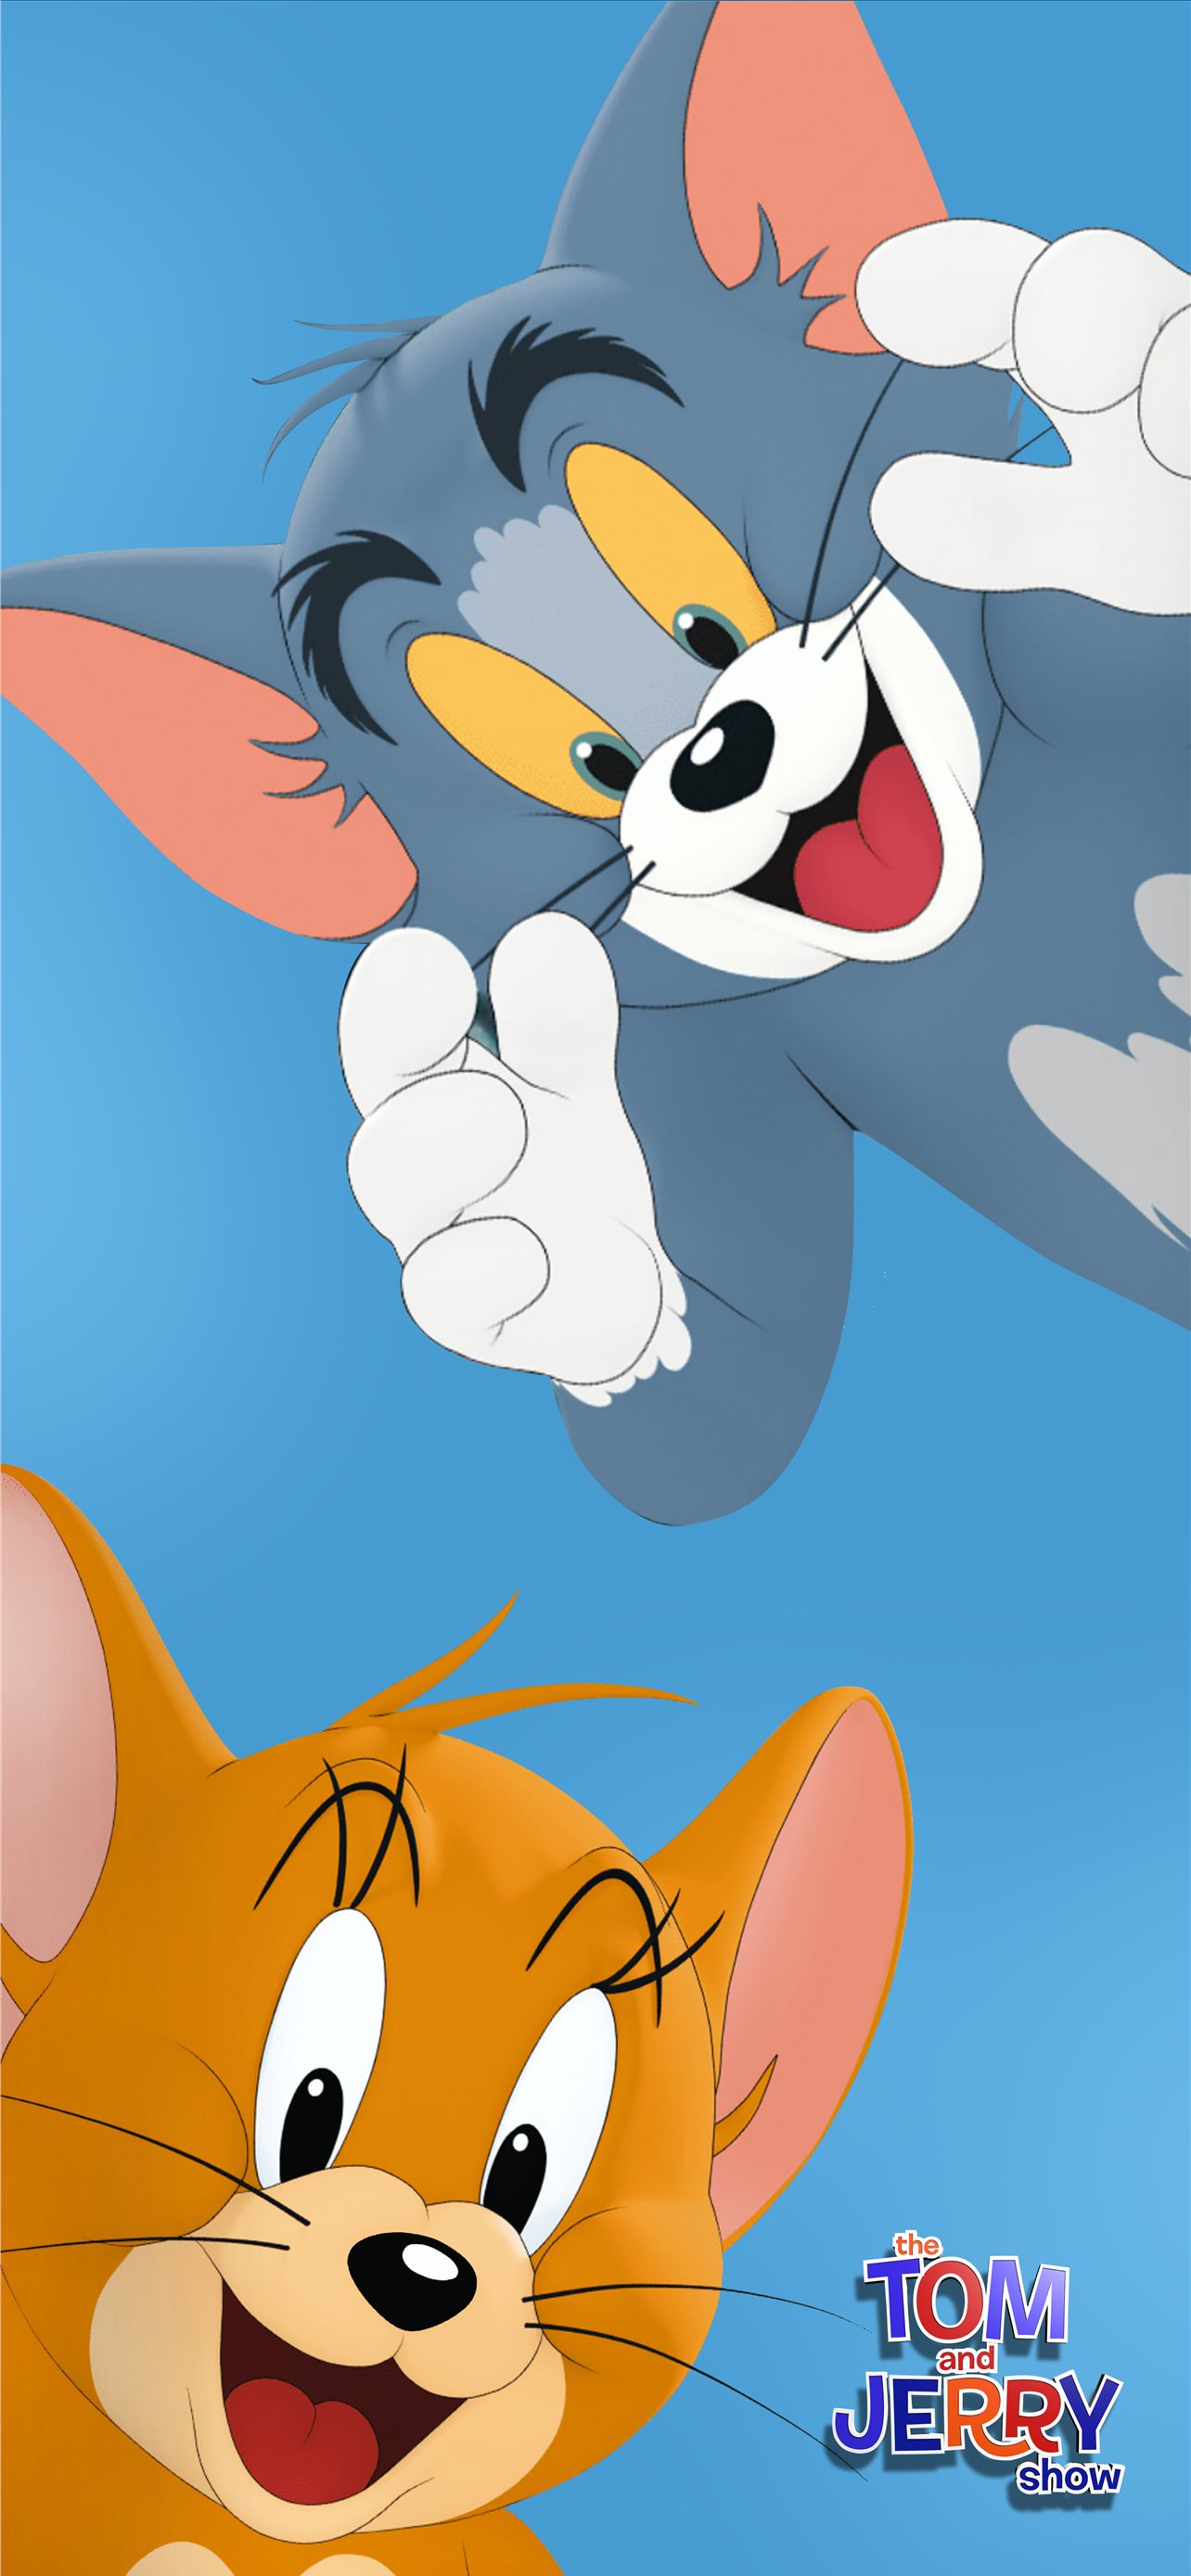 Buy British Terminal Tom and Jerry Cartoon Painting Poster Waterproof Vinyl  Sticker for Kids RoomHome Decor  can13891 Online at Low Prices in India   Amazonin